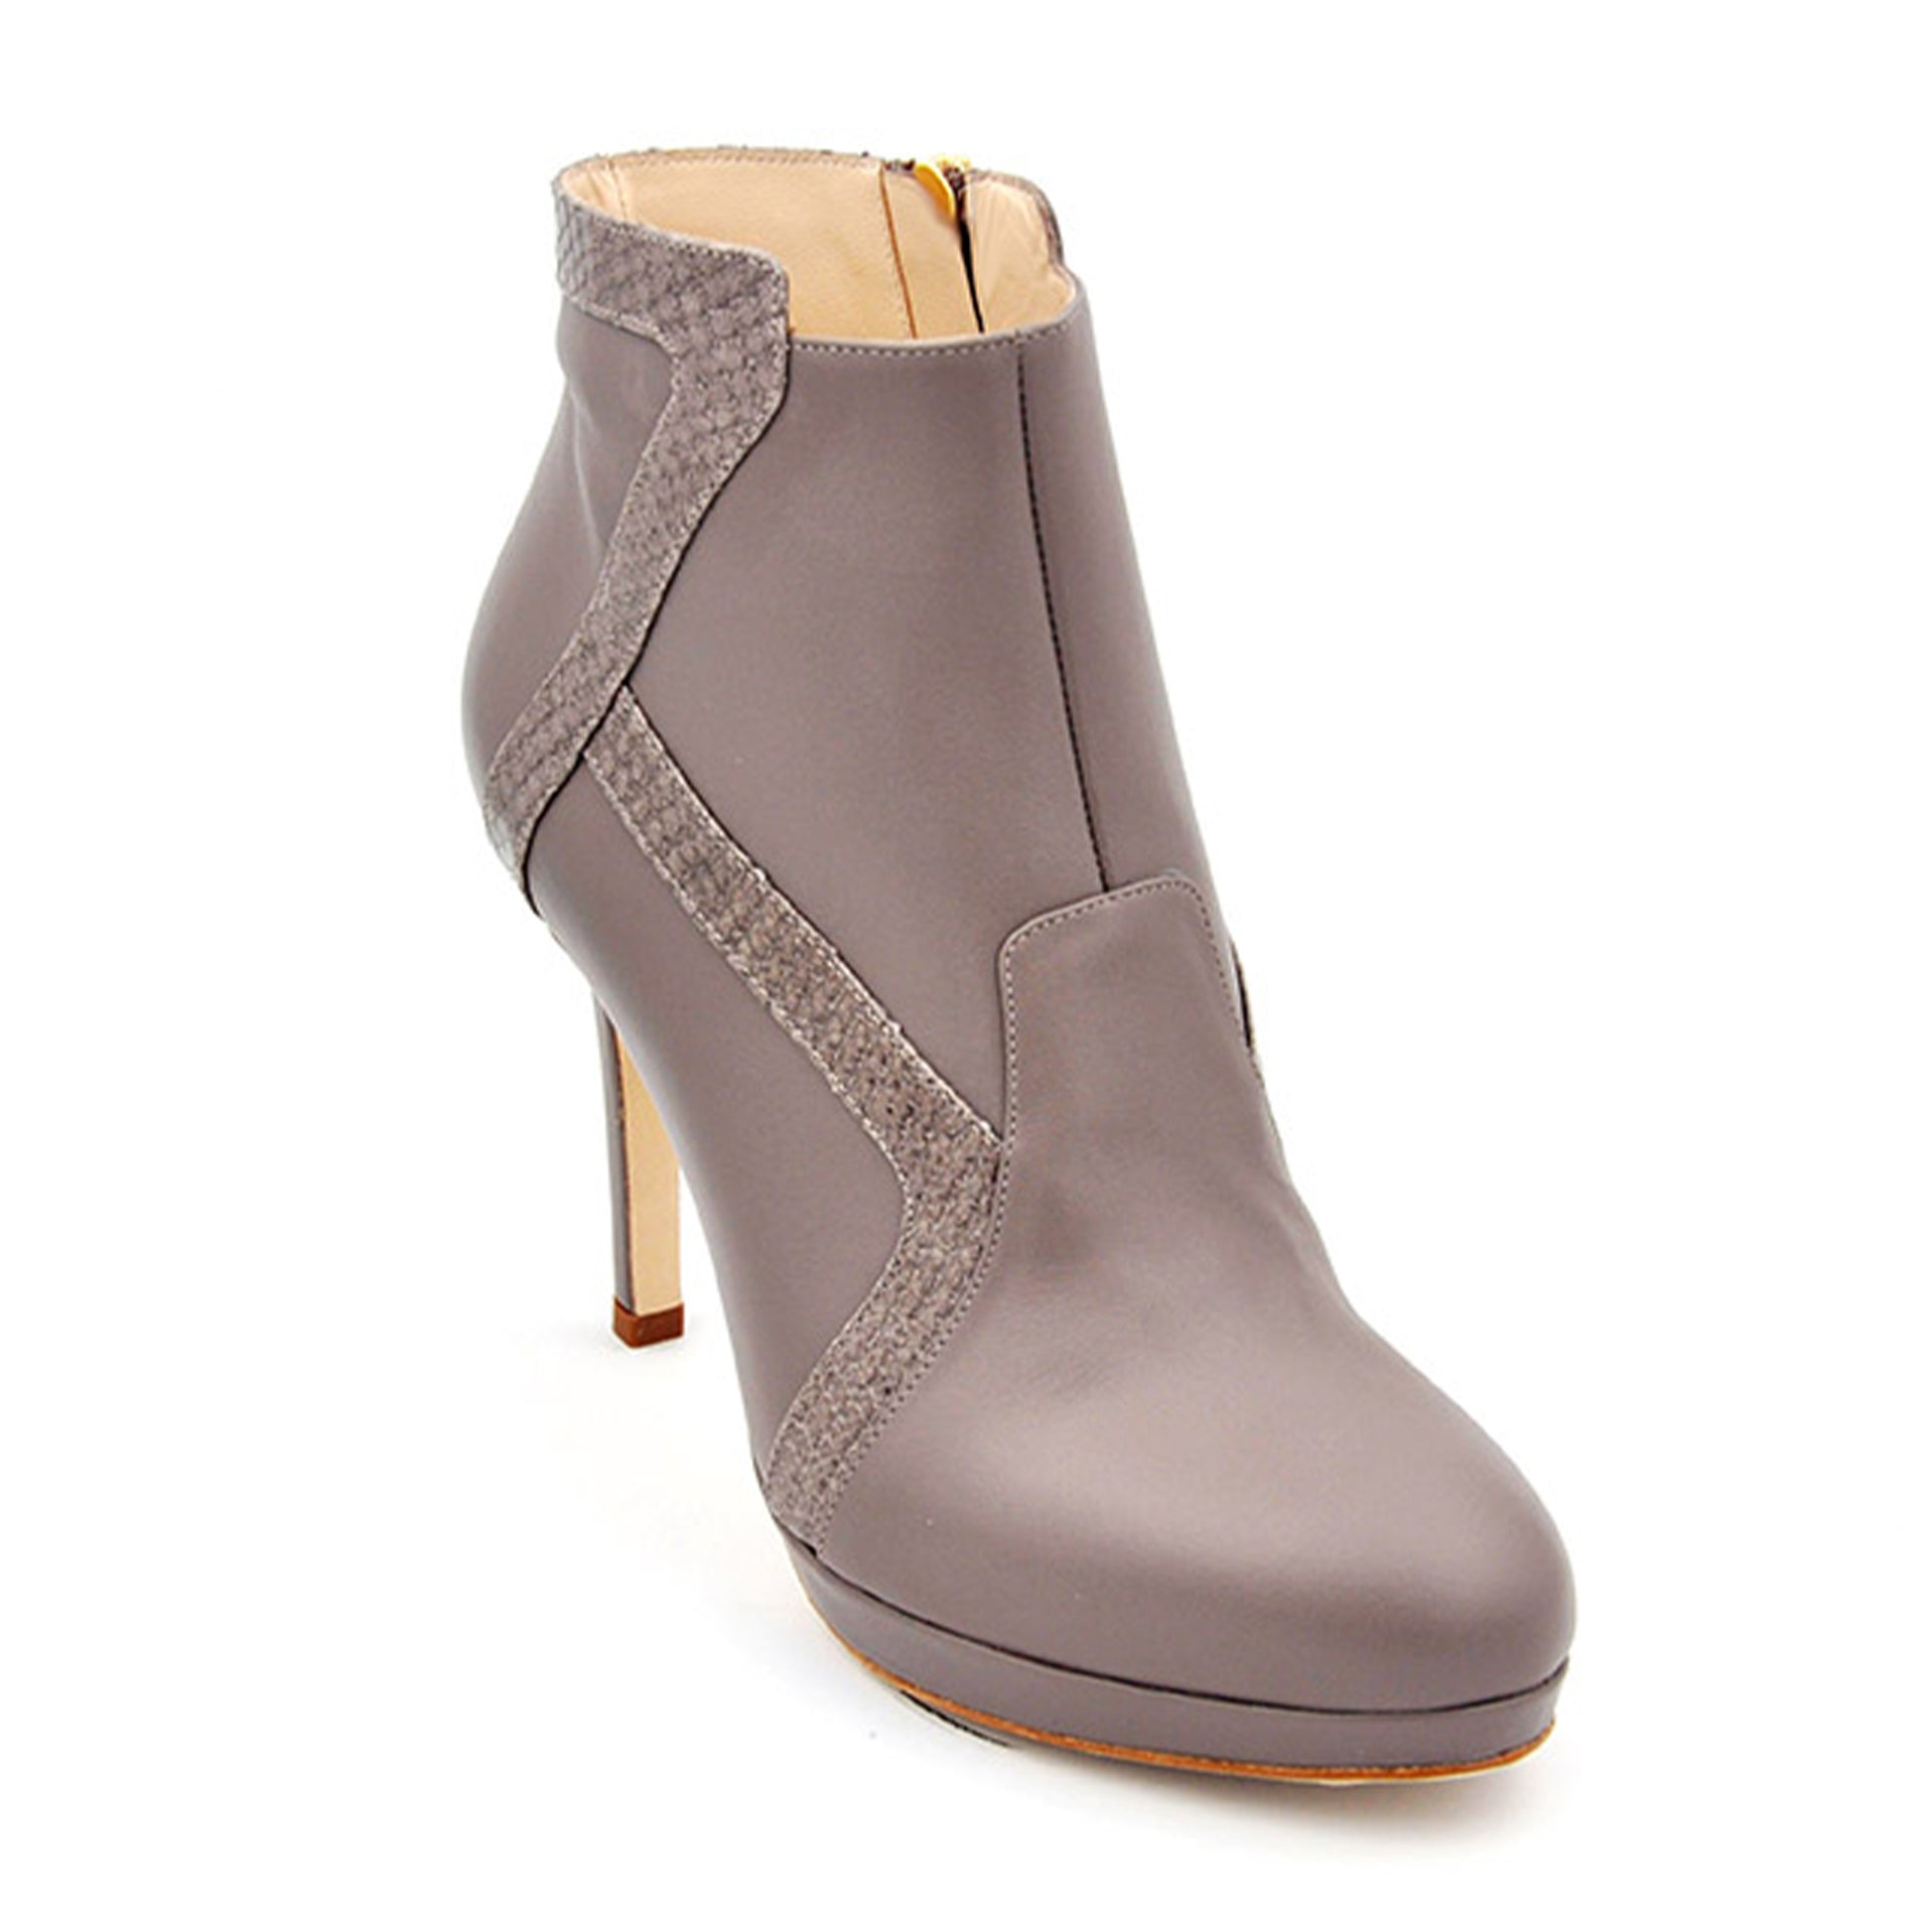 The Deia Bootie - Taupe Python Leather High Heel Boots